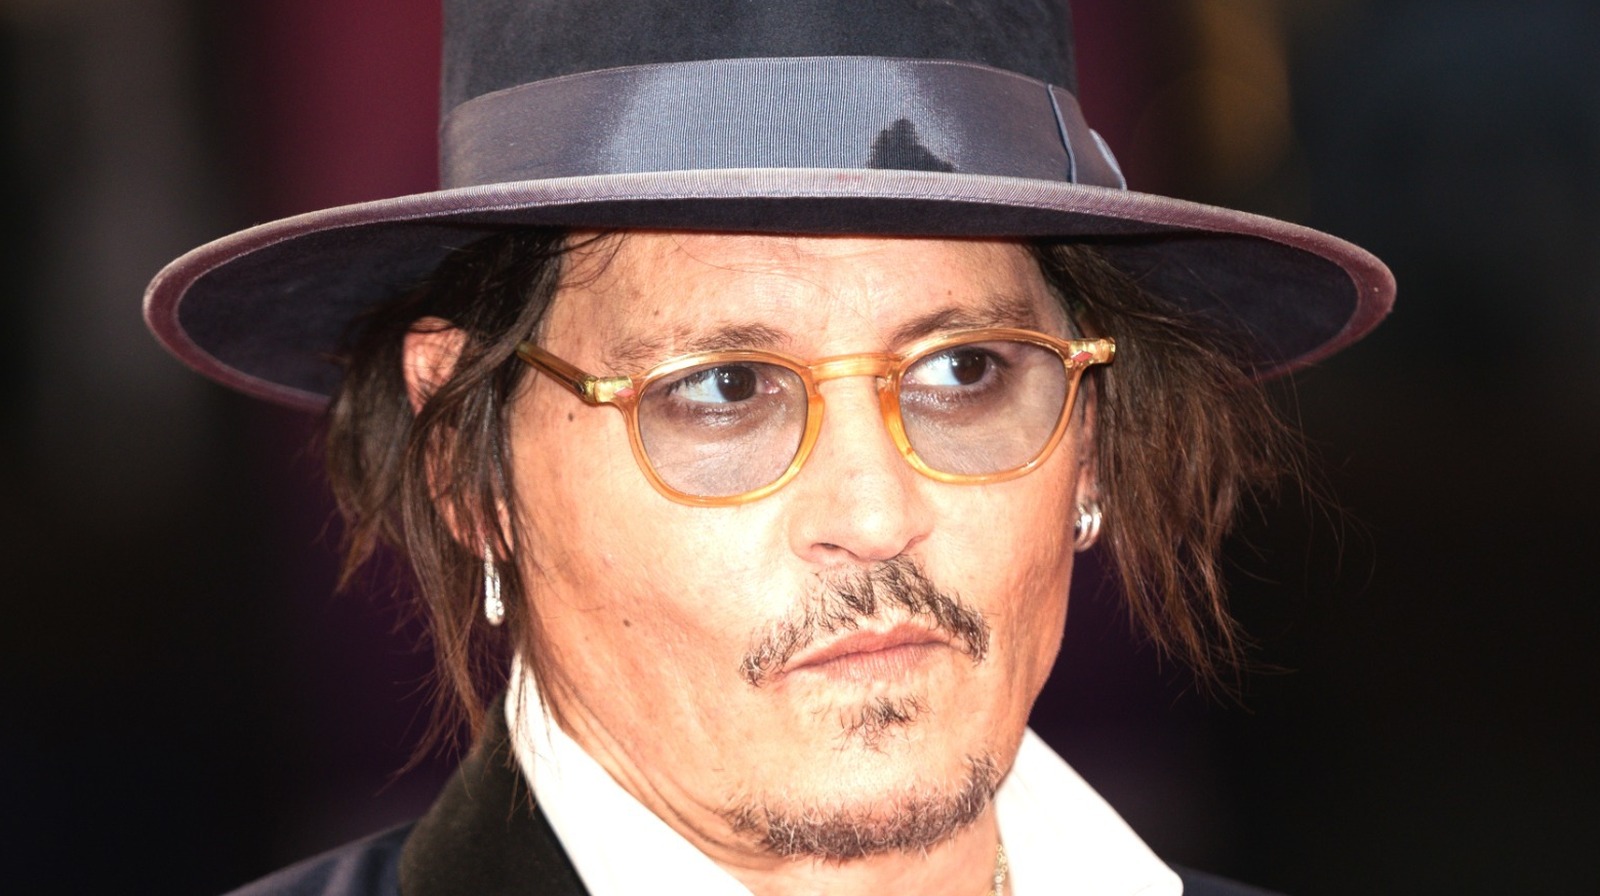 Johnny Depp's Embarrassing Breakout Role He Wishes You'd Forget